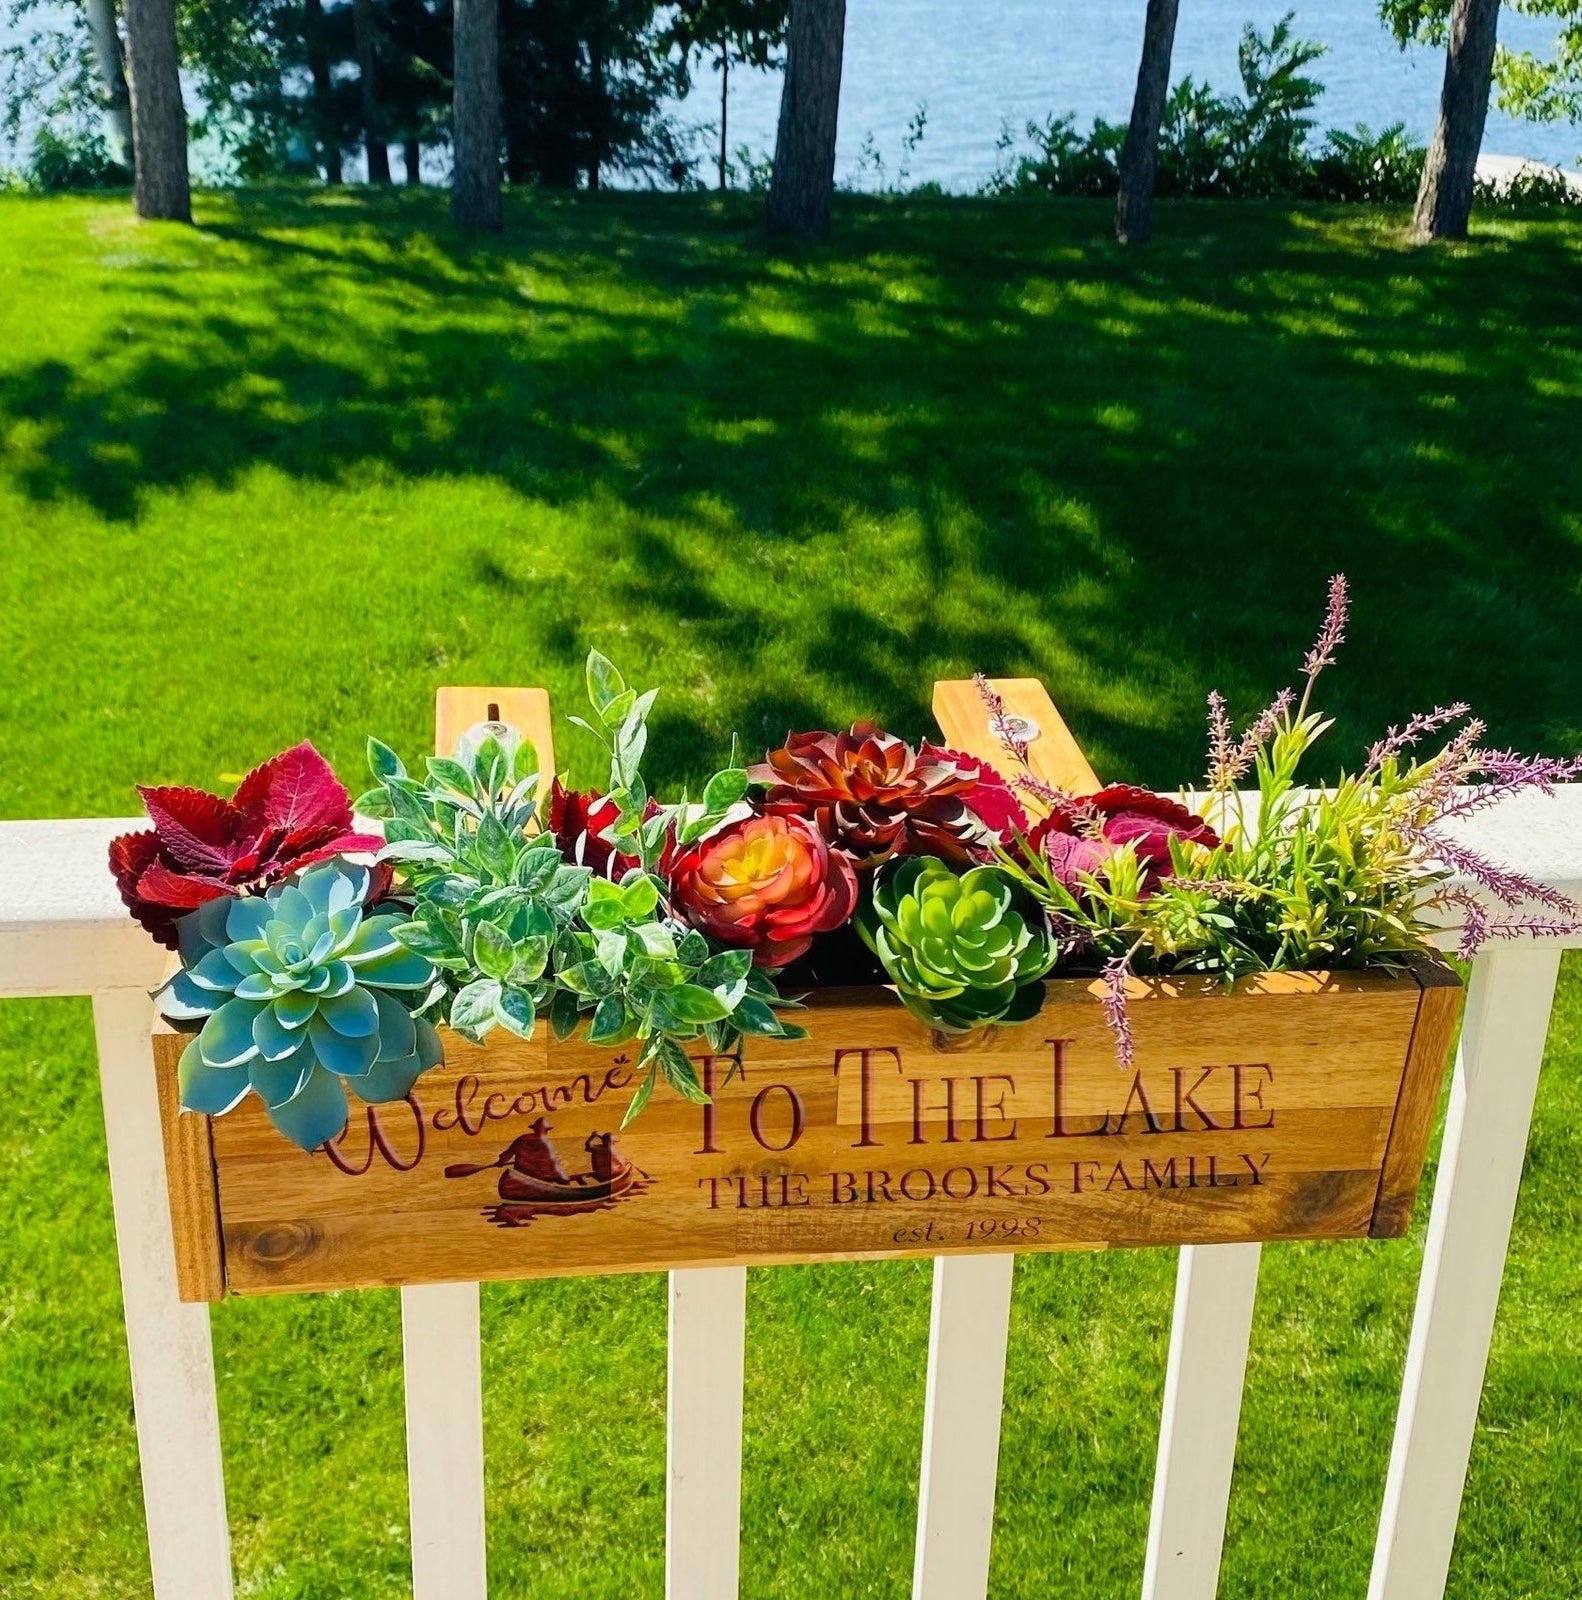 Plants and a personalized sign saying &#x27;Welcome to the Lake, The Brooks Family&#x27; on a fence with a lake in the background